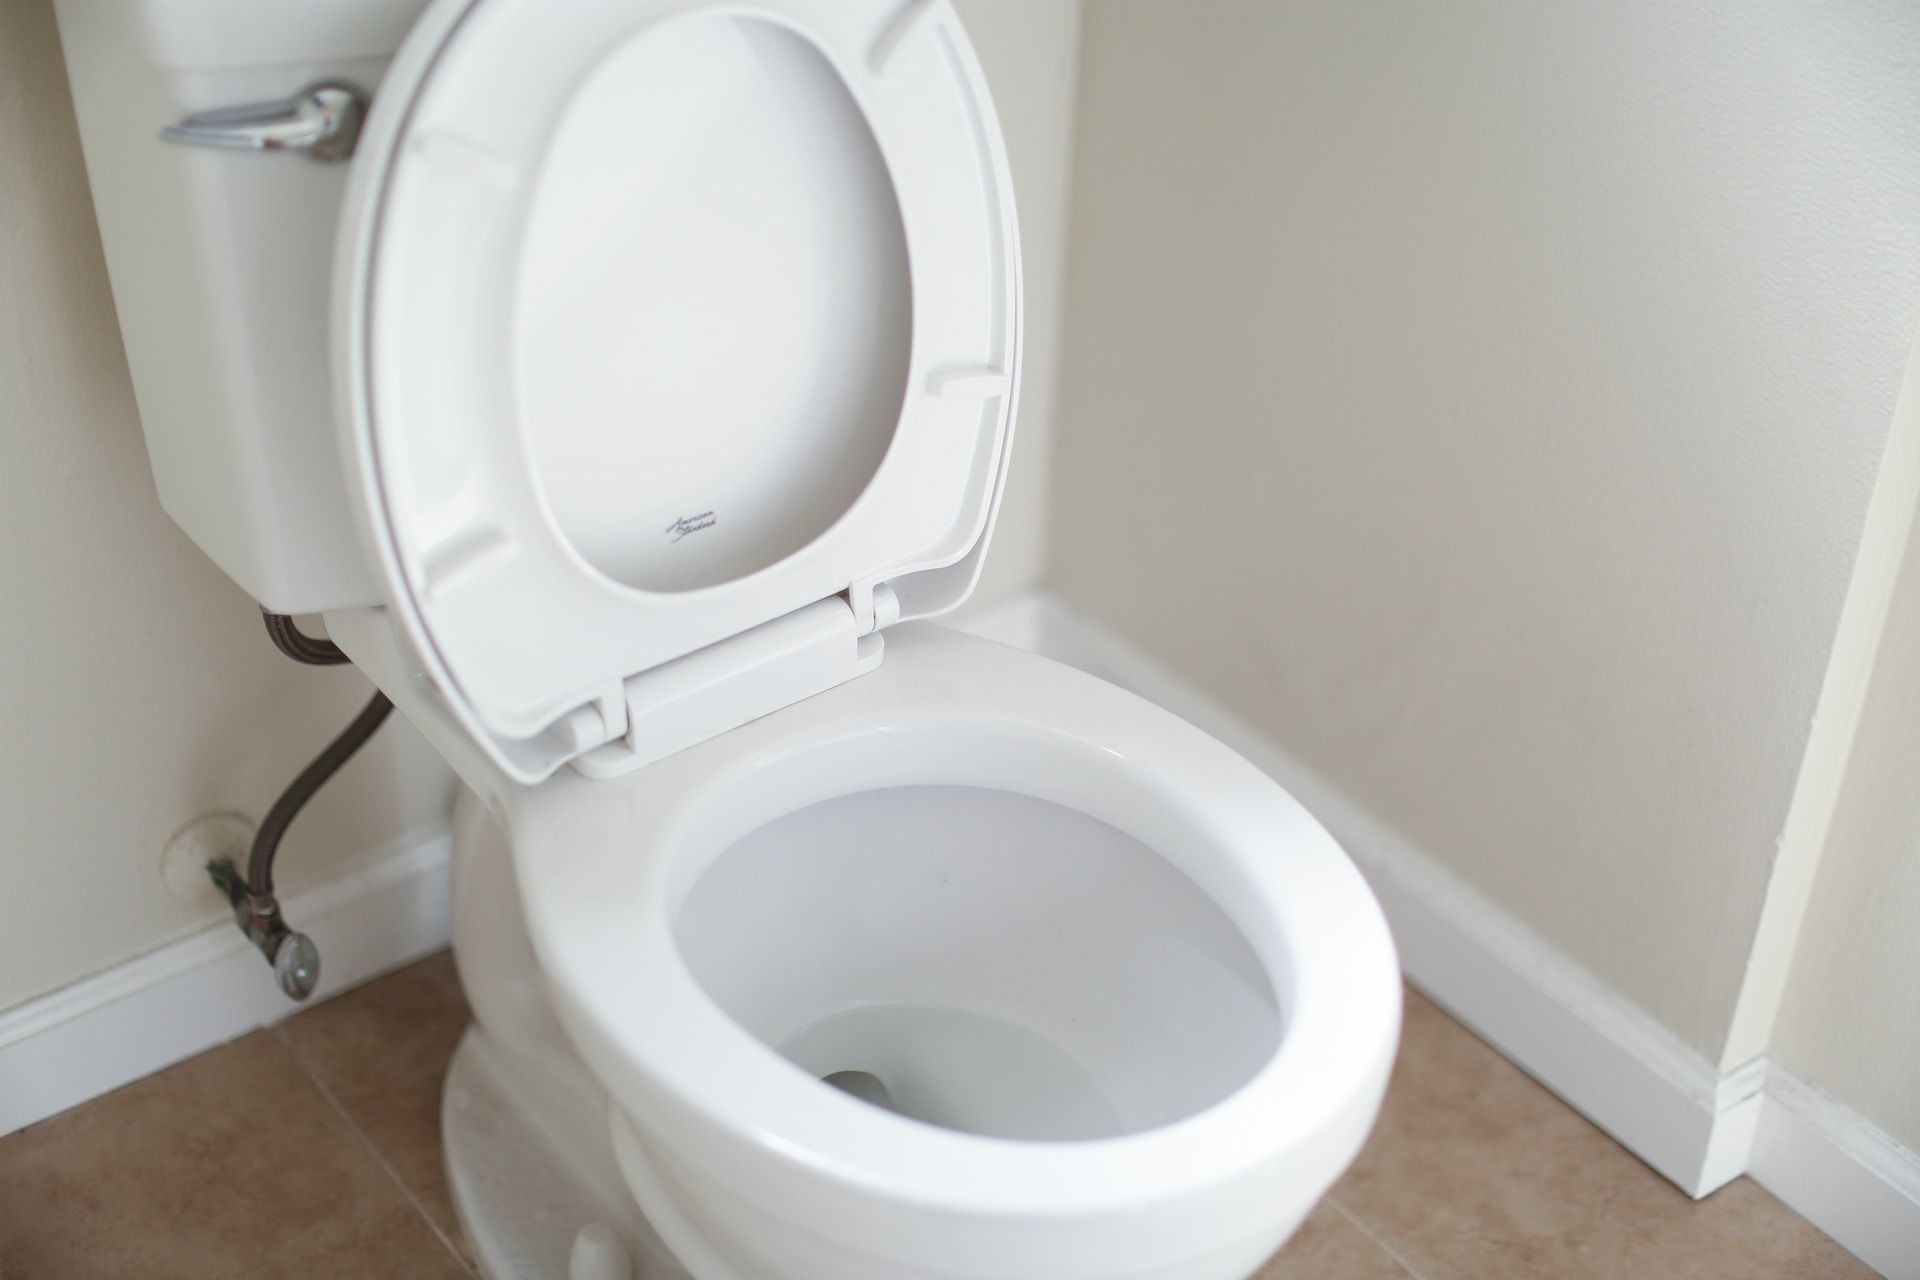 Toilet Tank Leaks When Flushed: How to Fix